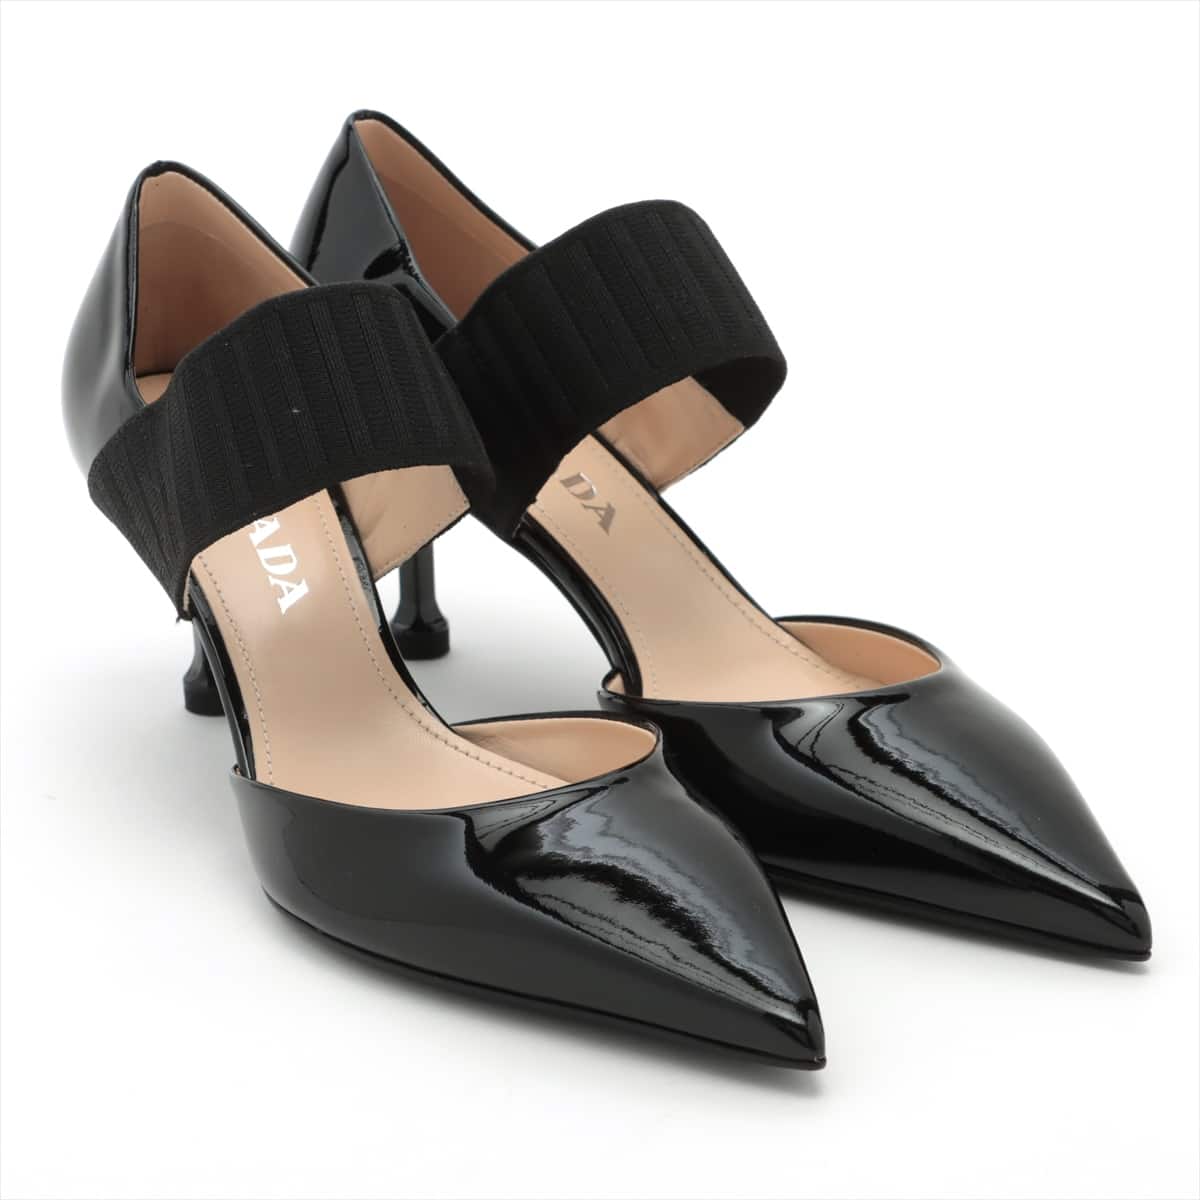 Prada Patent leather Pumps 36 1/2 Ladies' Black There is a box